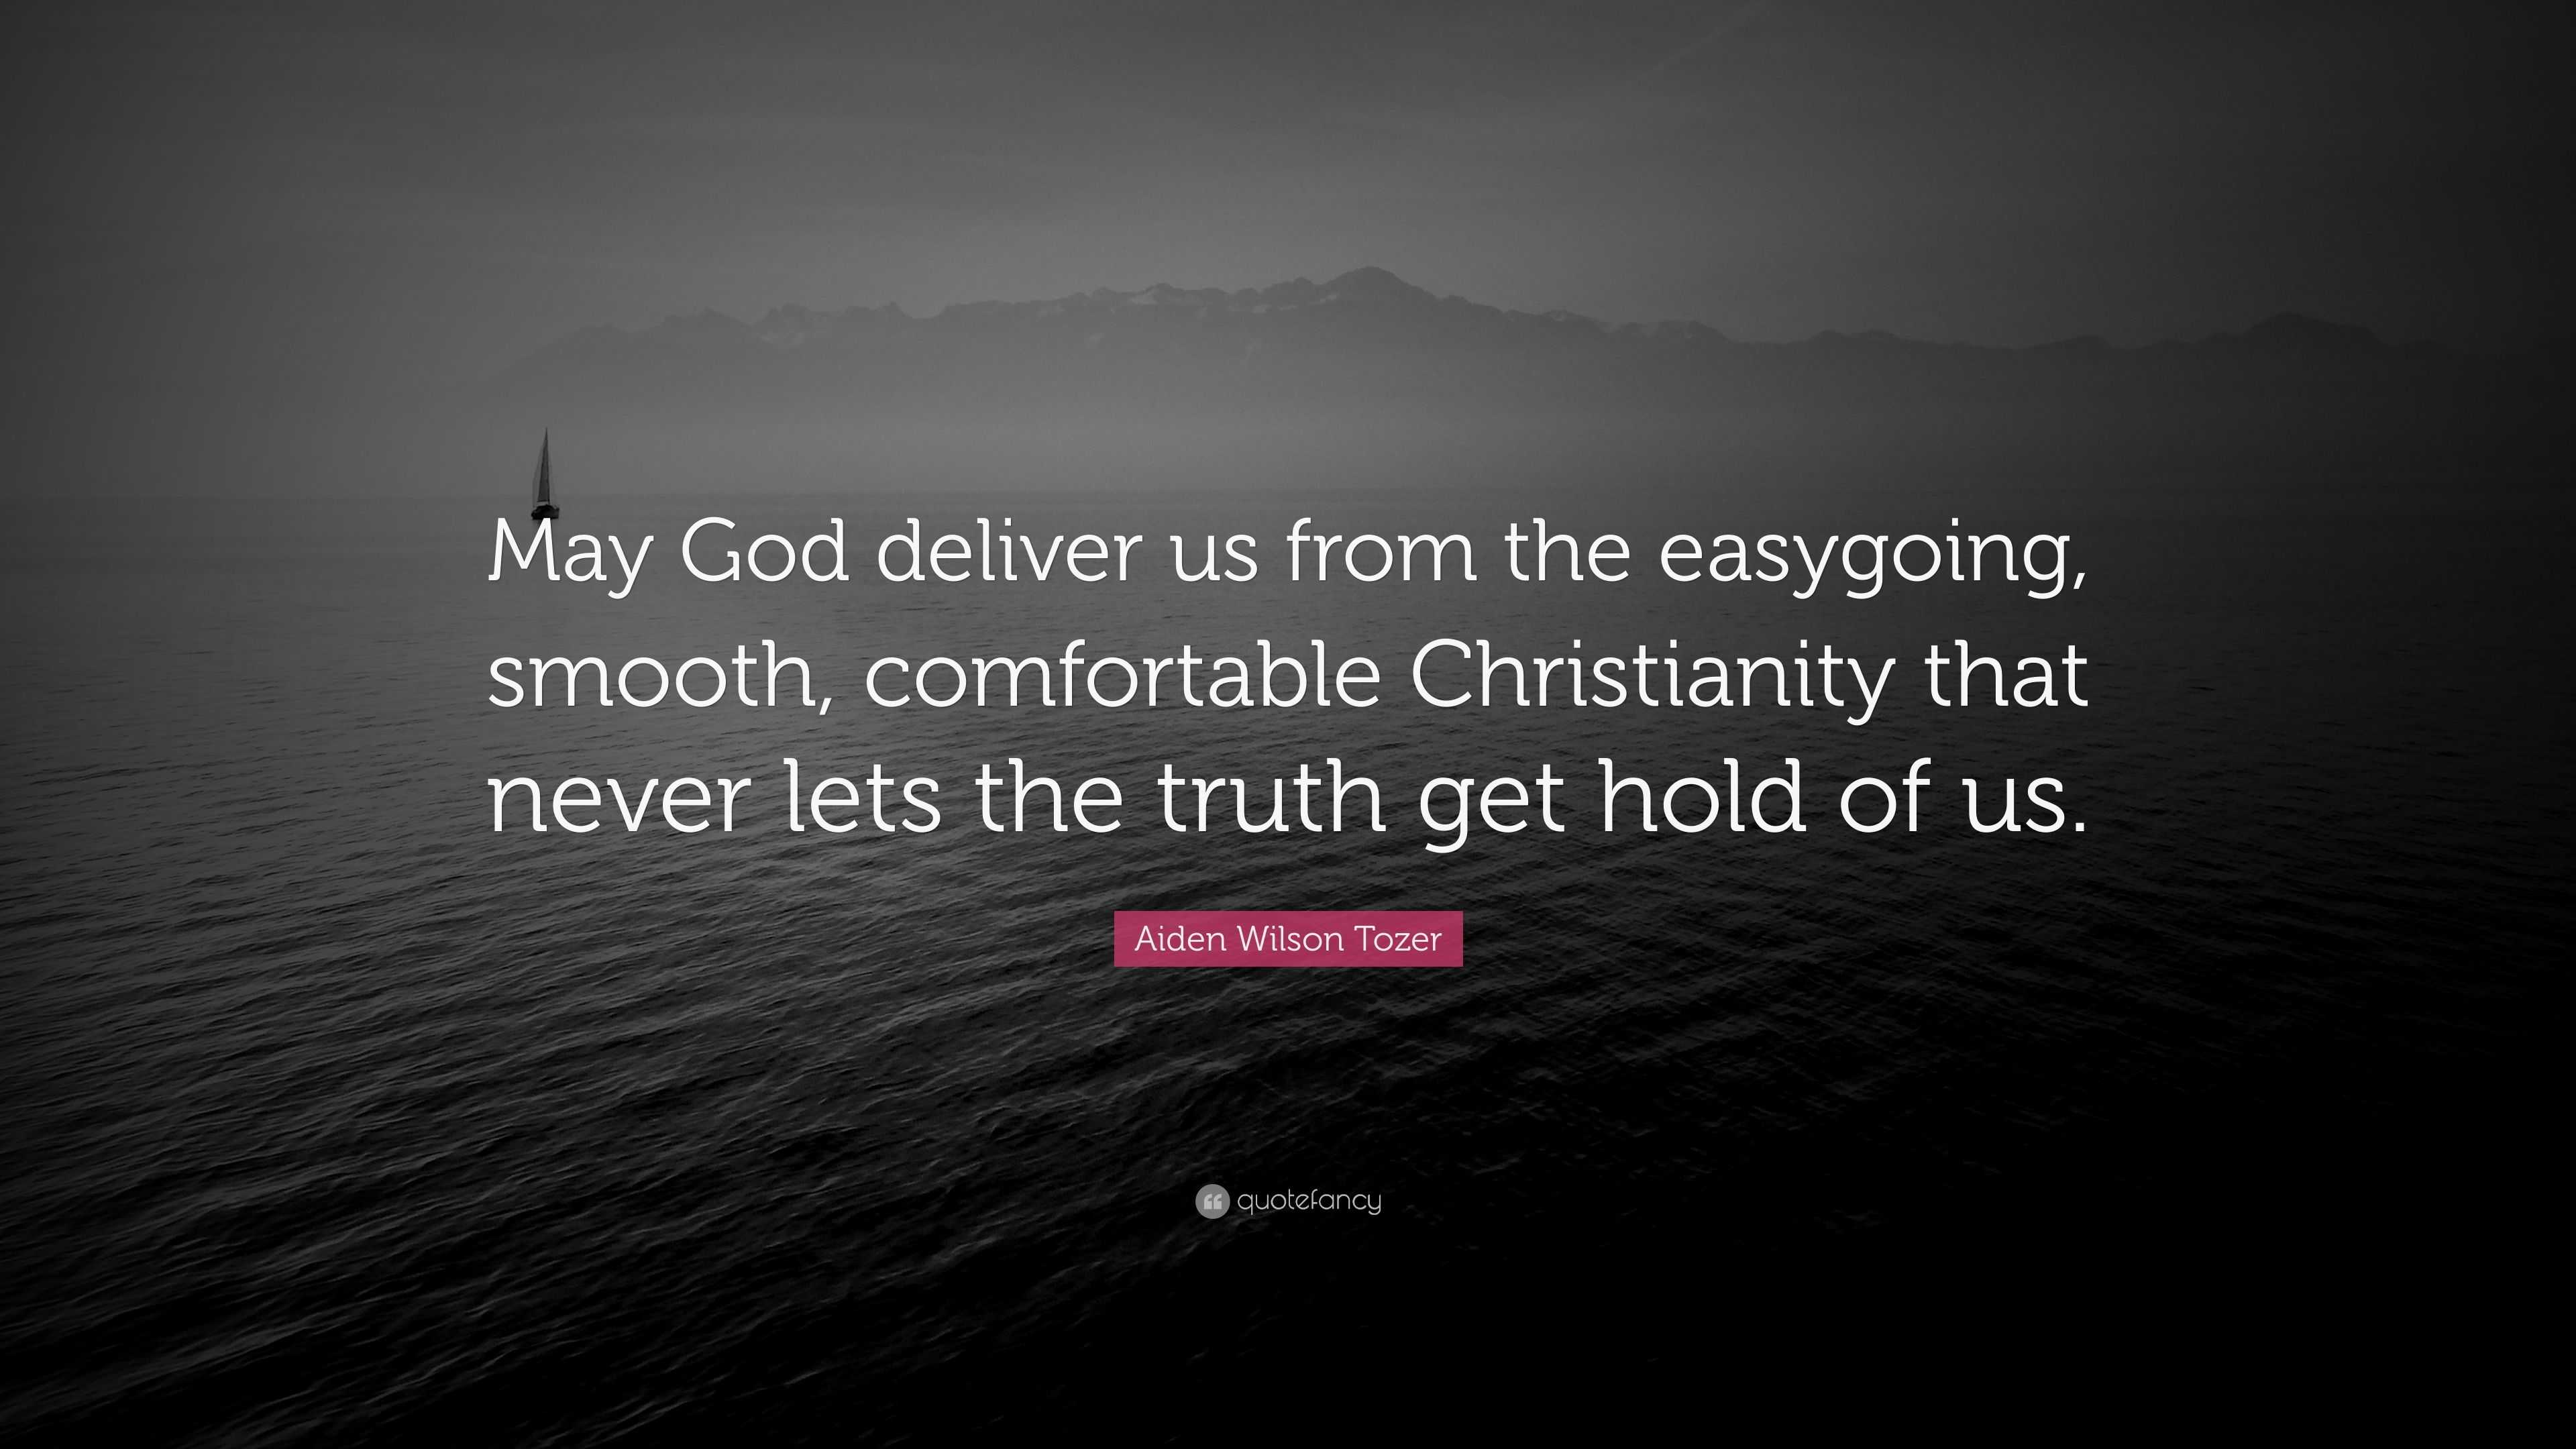 Aiden Wilson Tozer Quote: “May God deliver us from the easygoing, smooth,  comfortable Christianity that never